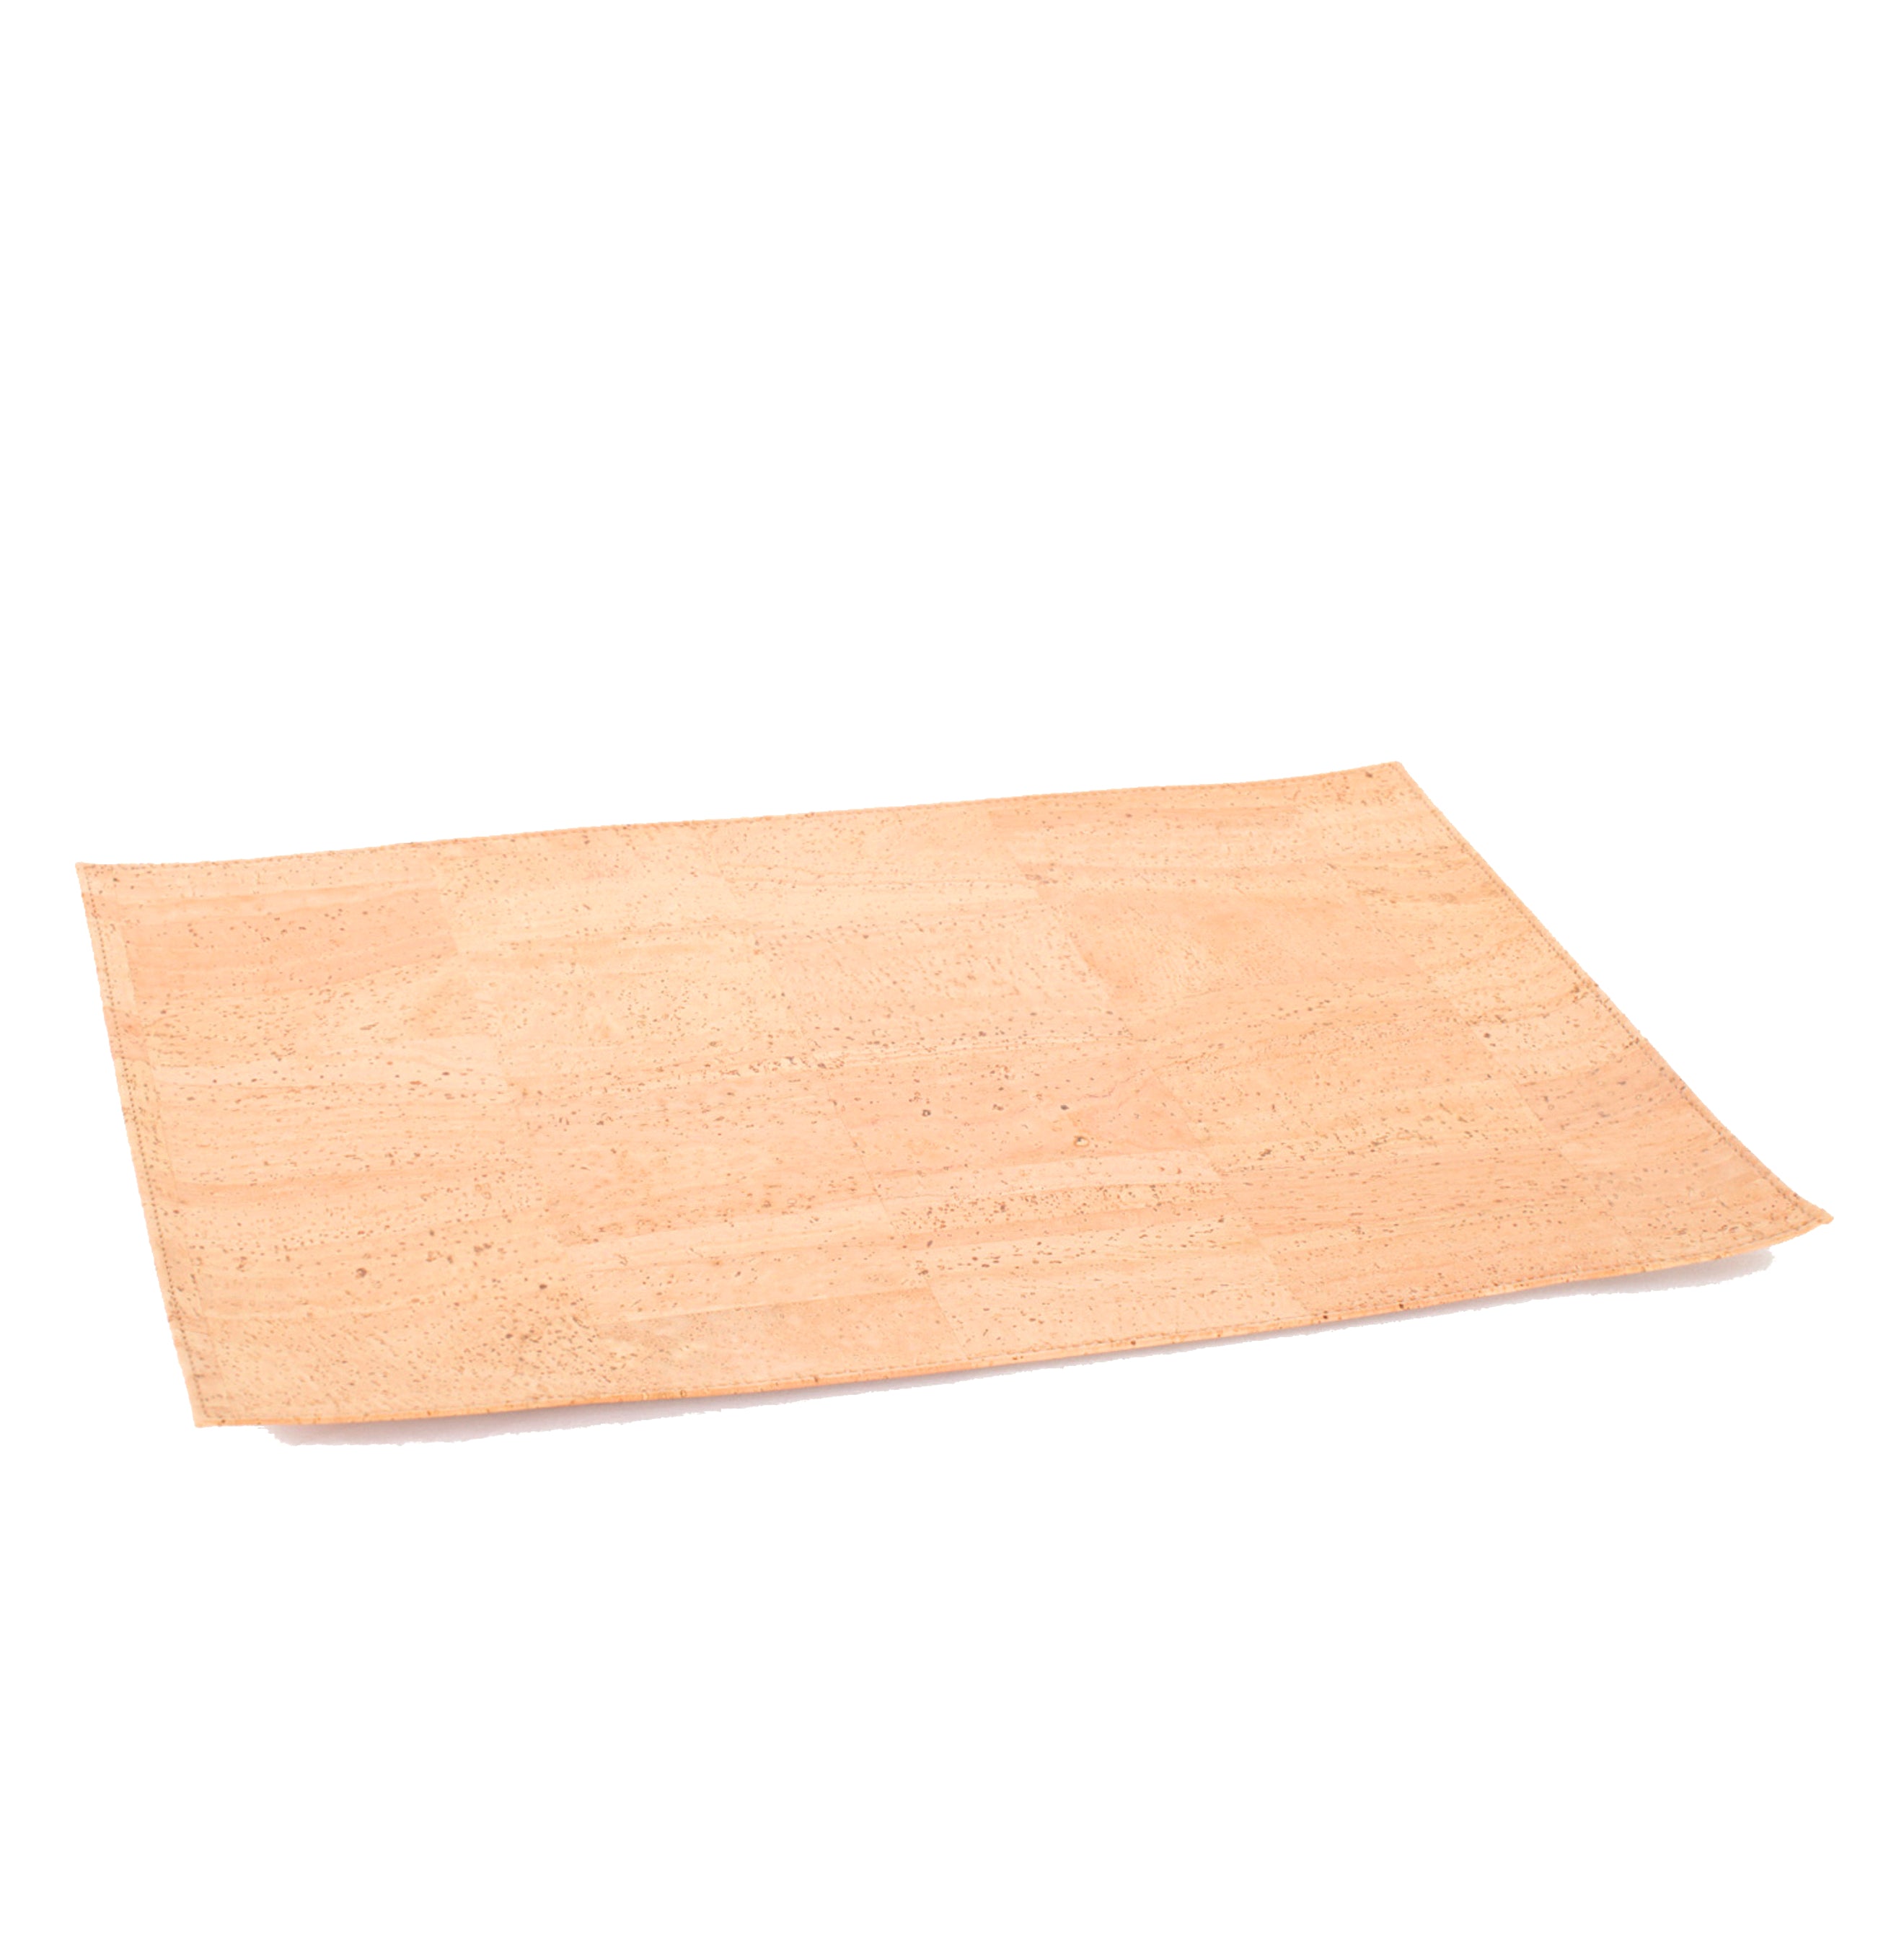 Cork Rectangular Placemat - Cork and Company | Made in Portugal | Vegan Eco-Friendly Fashion